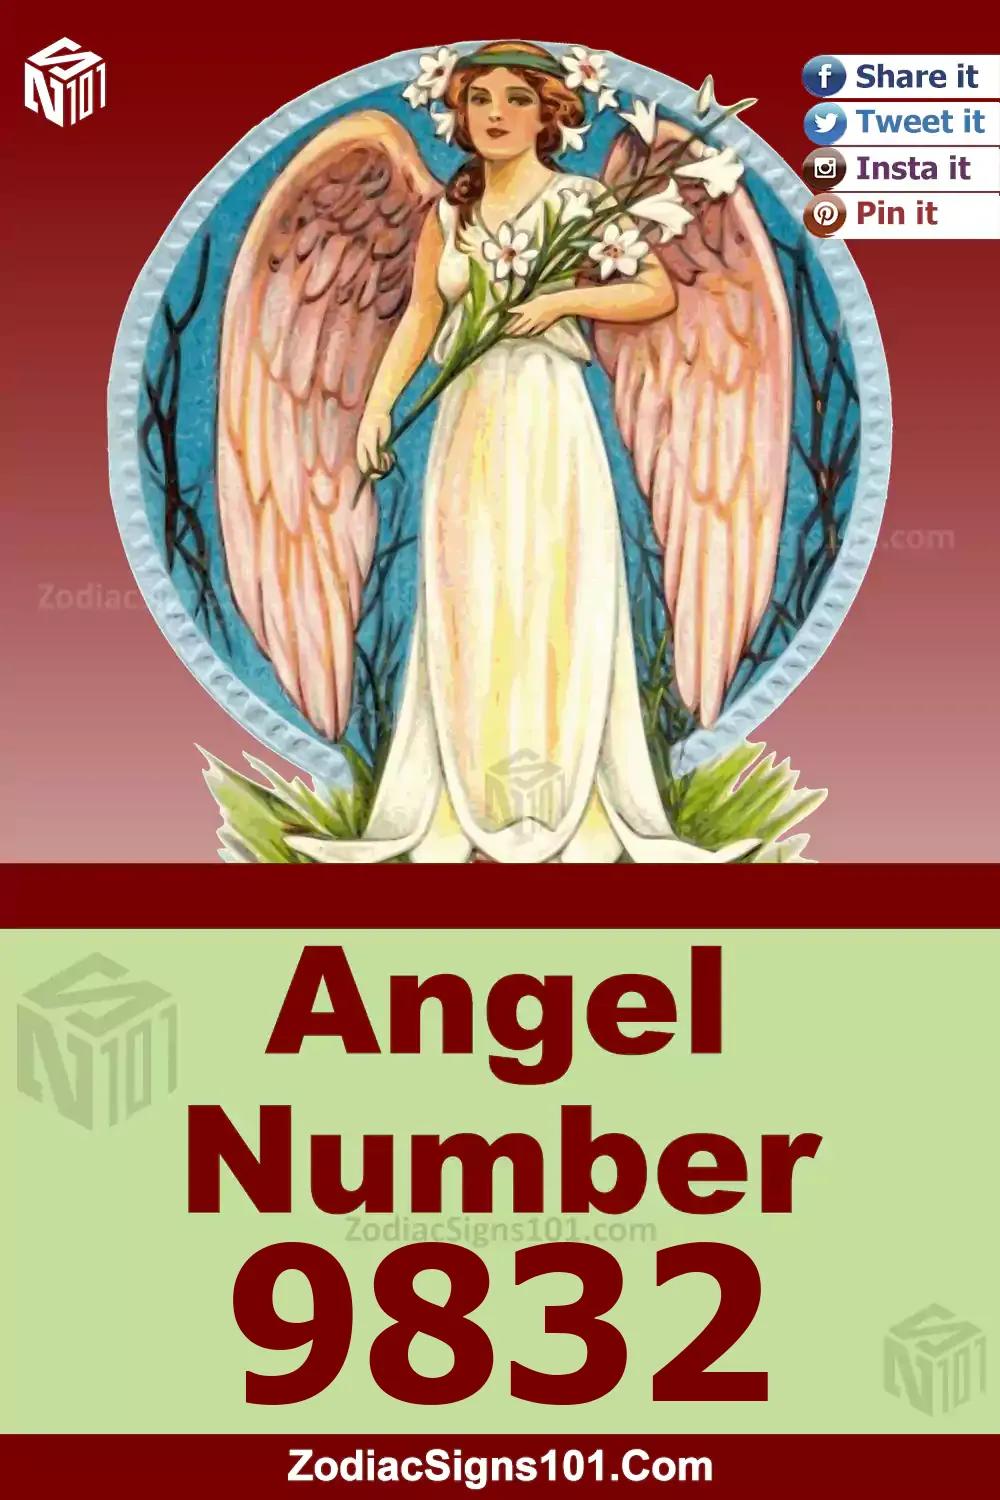 9832 Angel Number Meaning